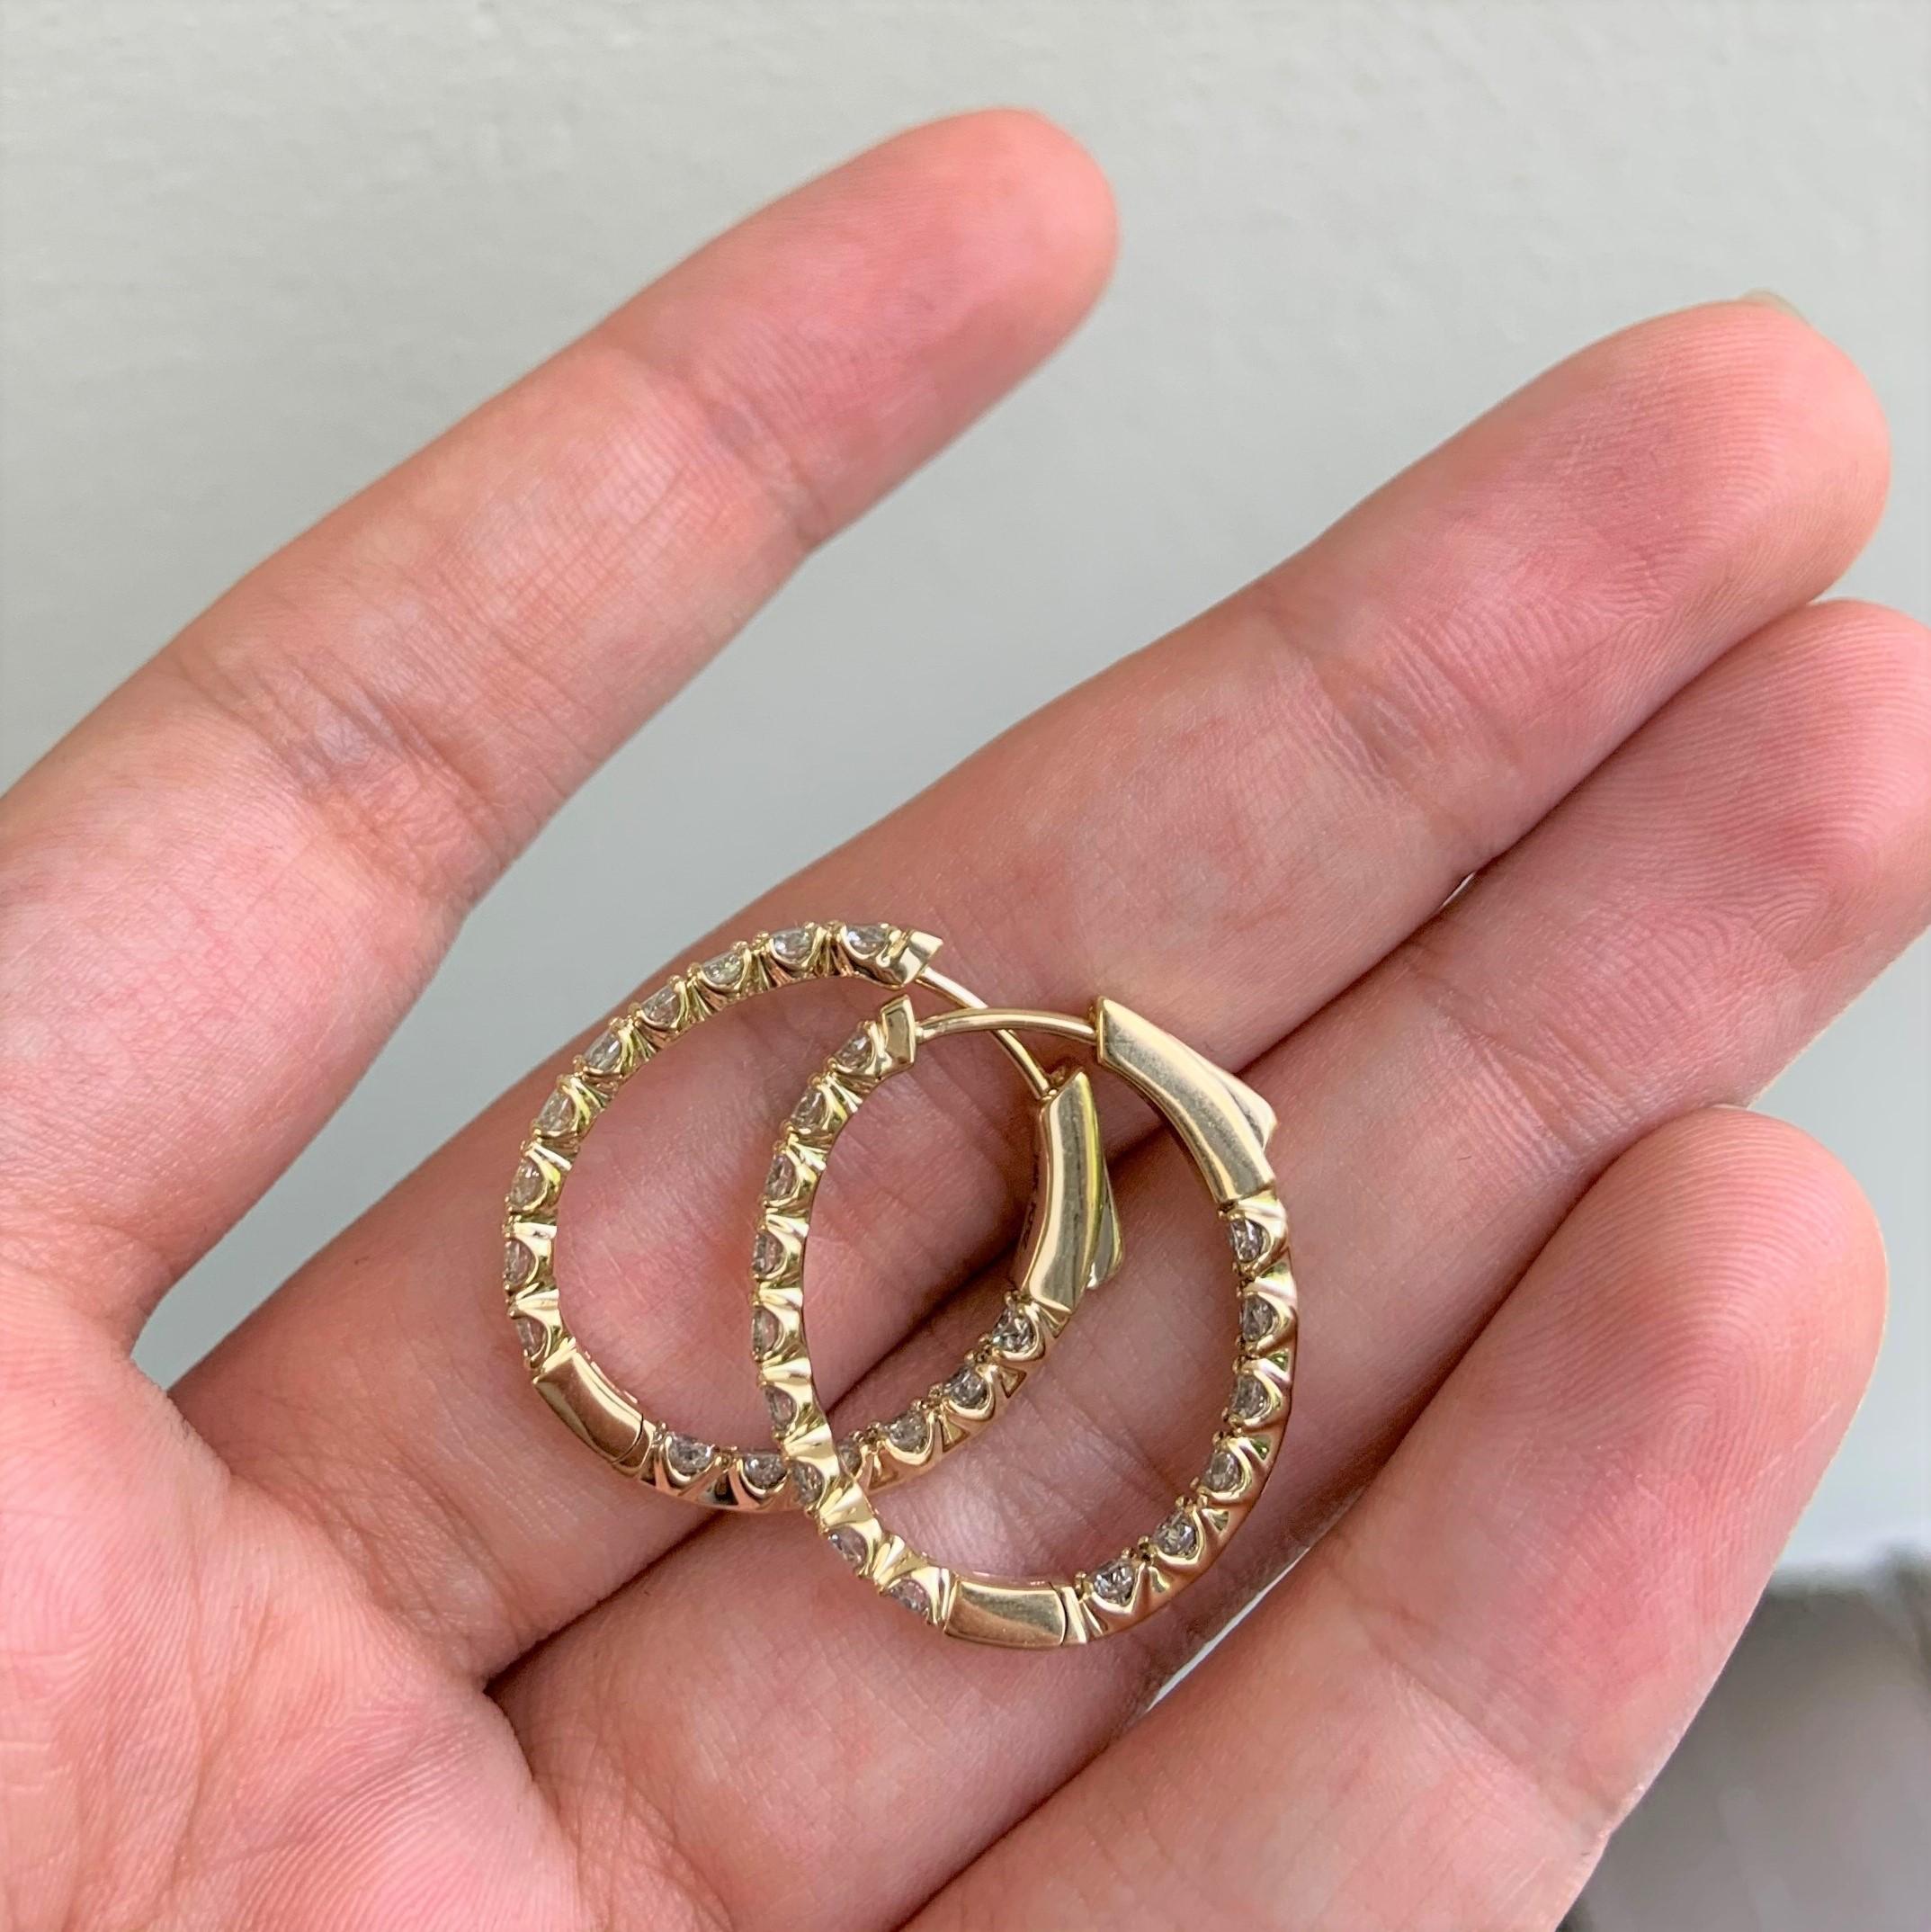 These Classic and Elegant Diamond Oval Hoop Earrings will frame your face beautifully! Crafted of 14K Yellow Gold these earrings feature approximately 1.91 cts of Natural Round Diamonds. Diamond Color and Clarity is GH-SI1. Insert Latch for